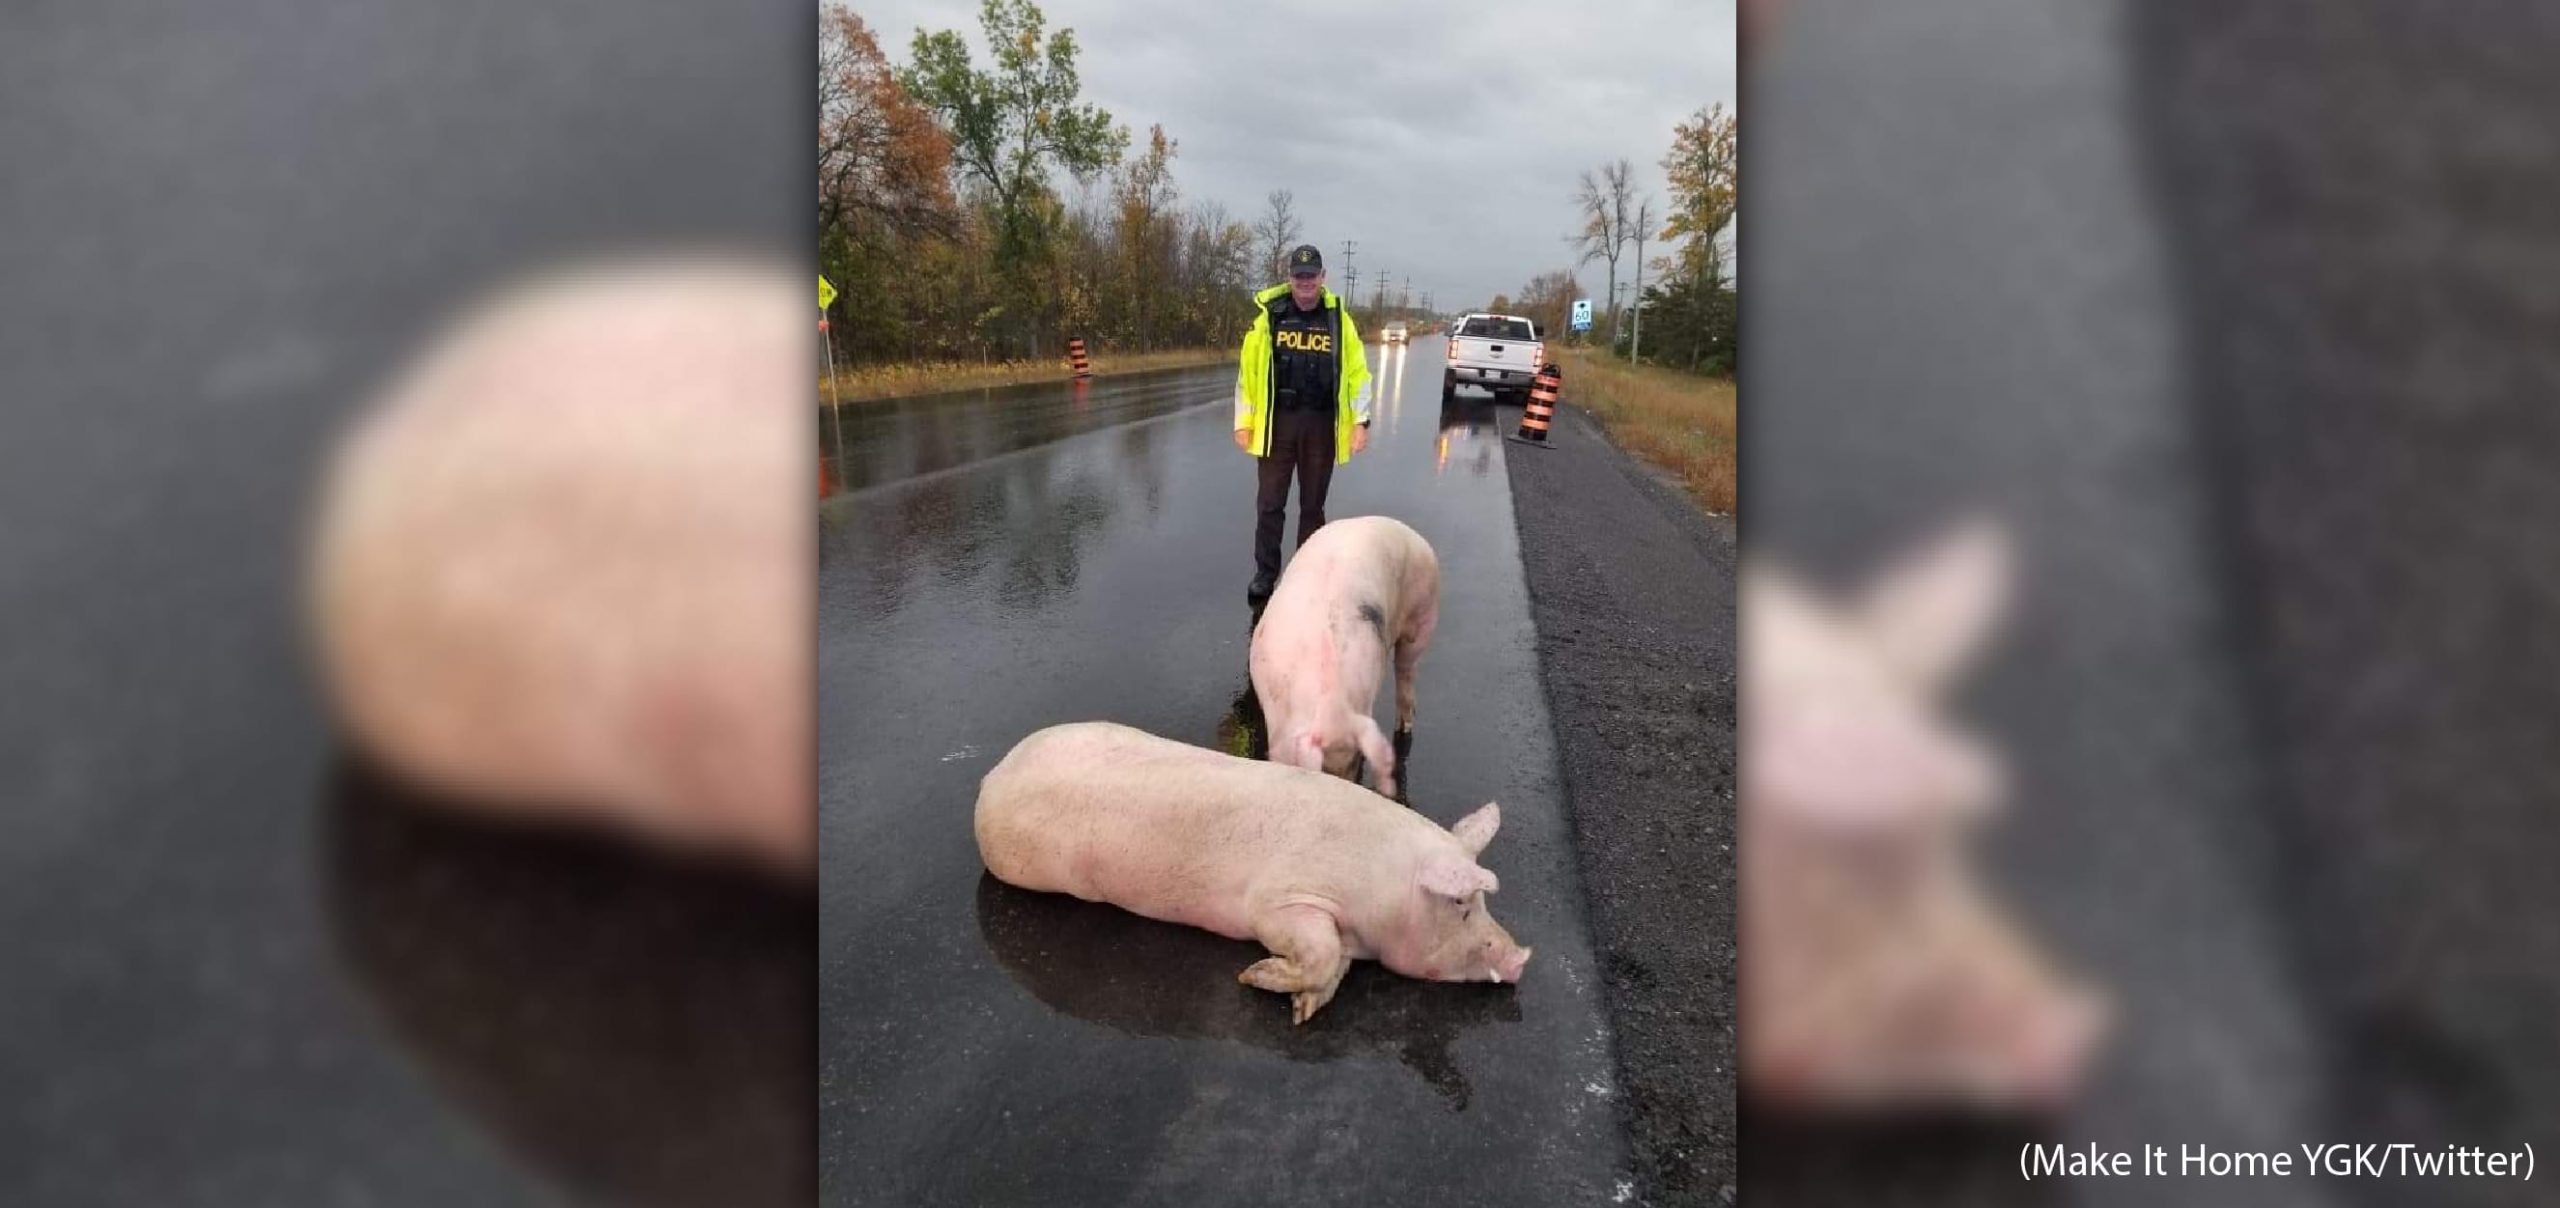 Animal Justice Files Cruelty Complaint After 5 Pigs Fall From Moving  Transport Truck - Animal Justice